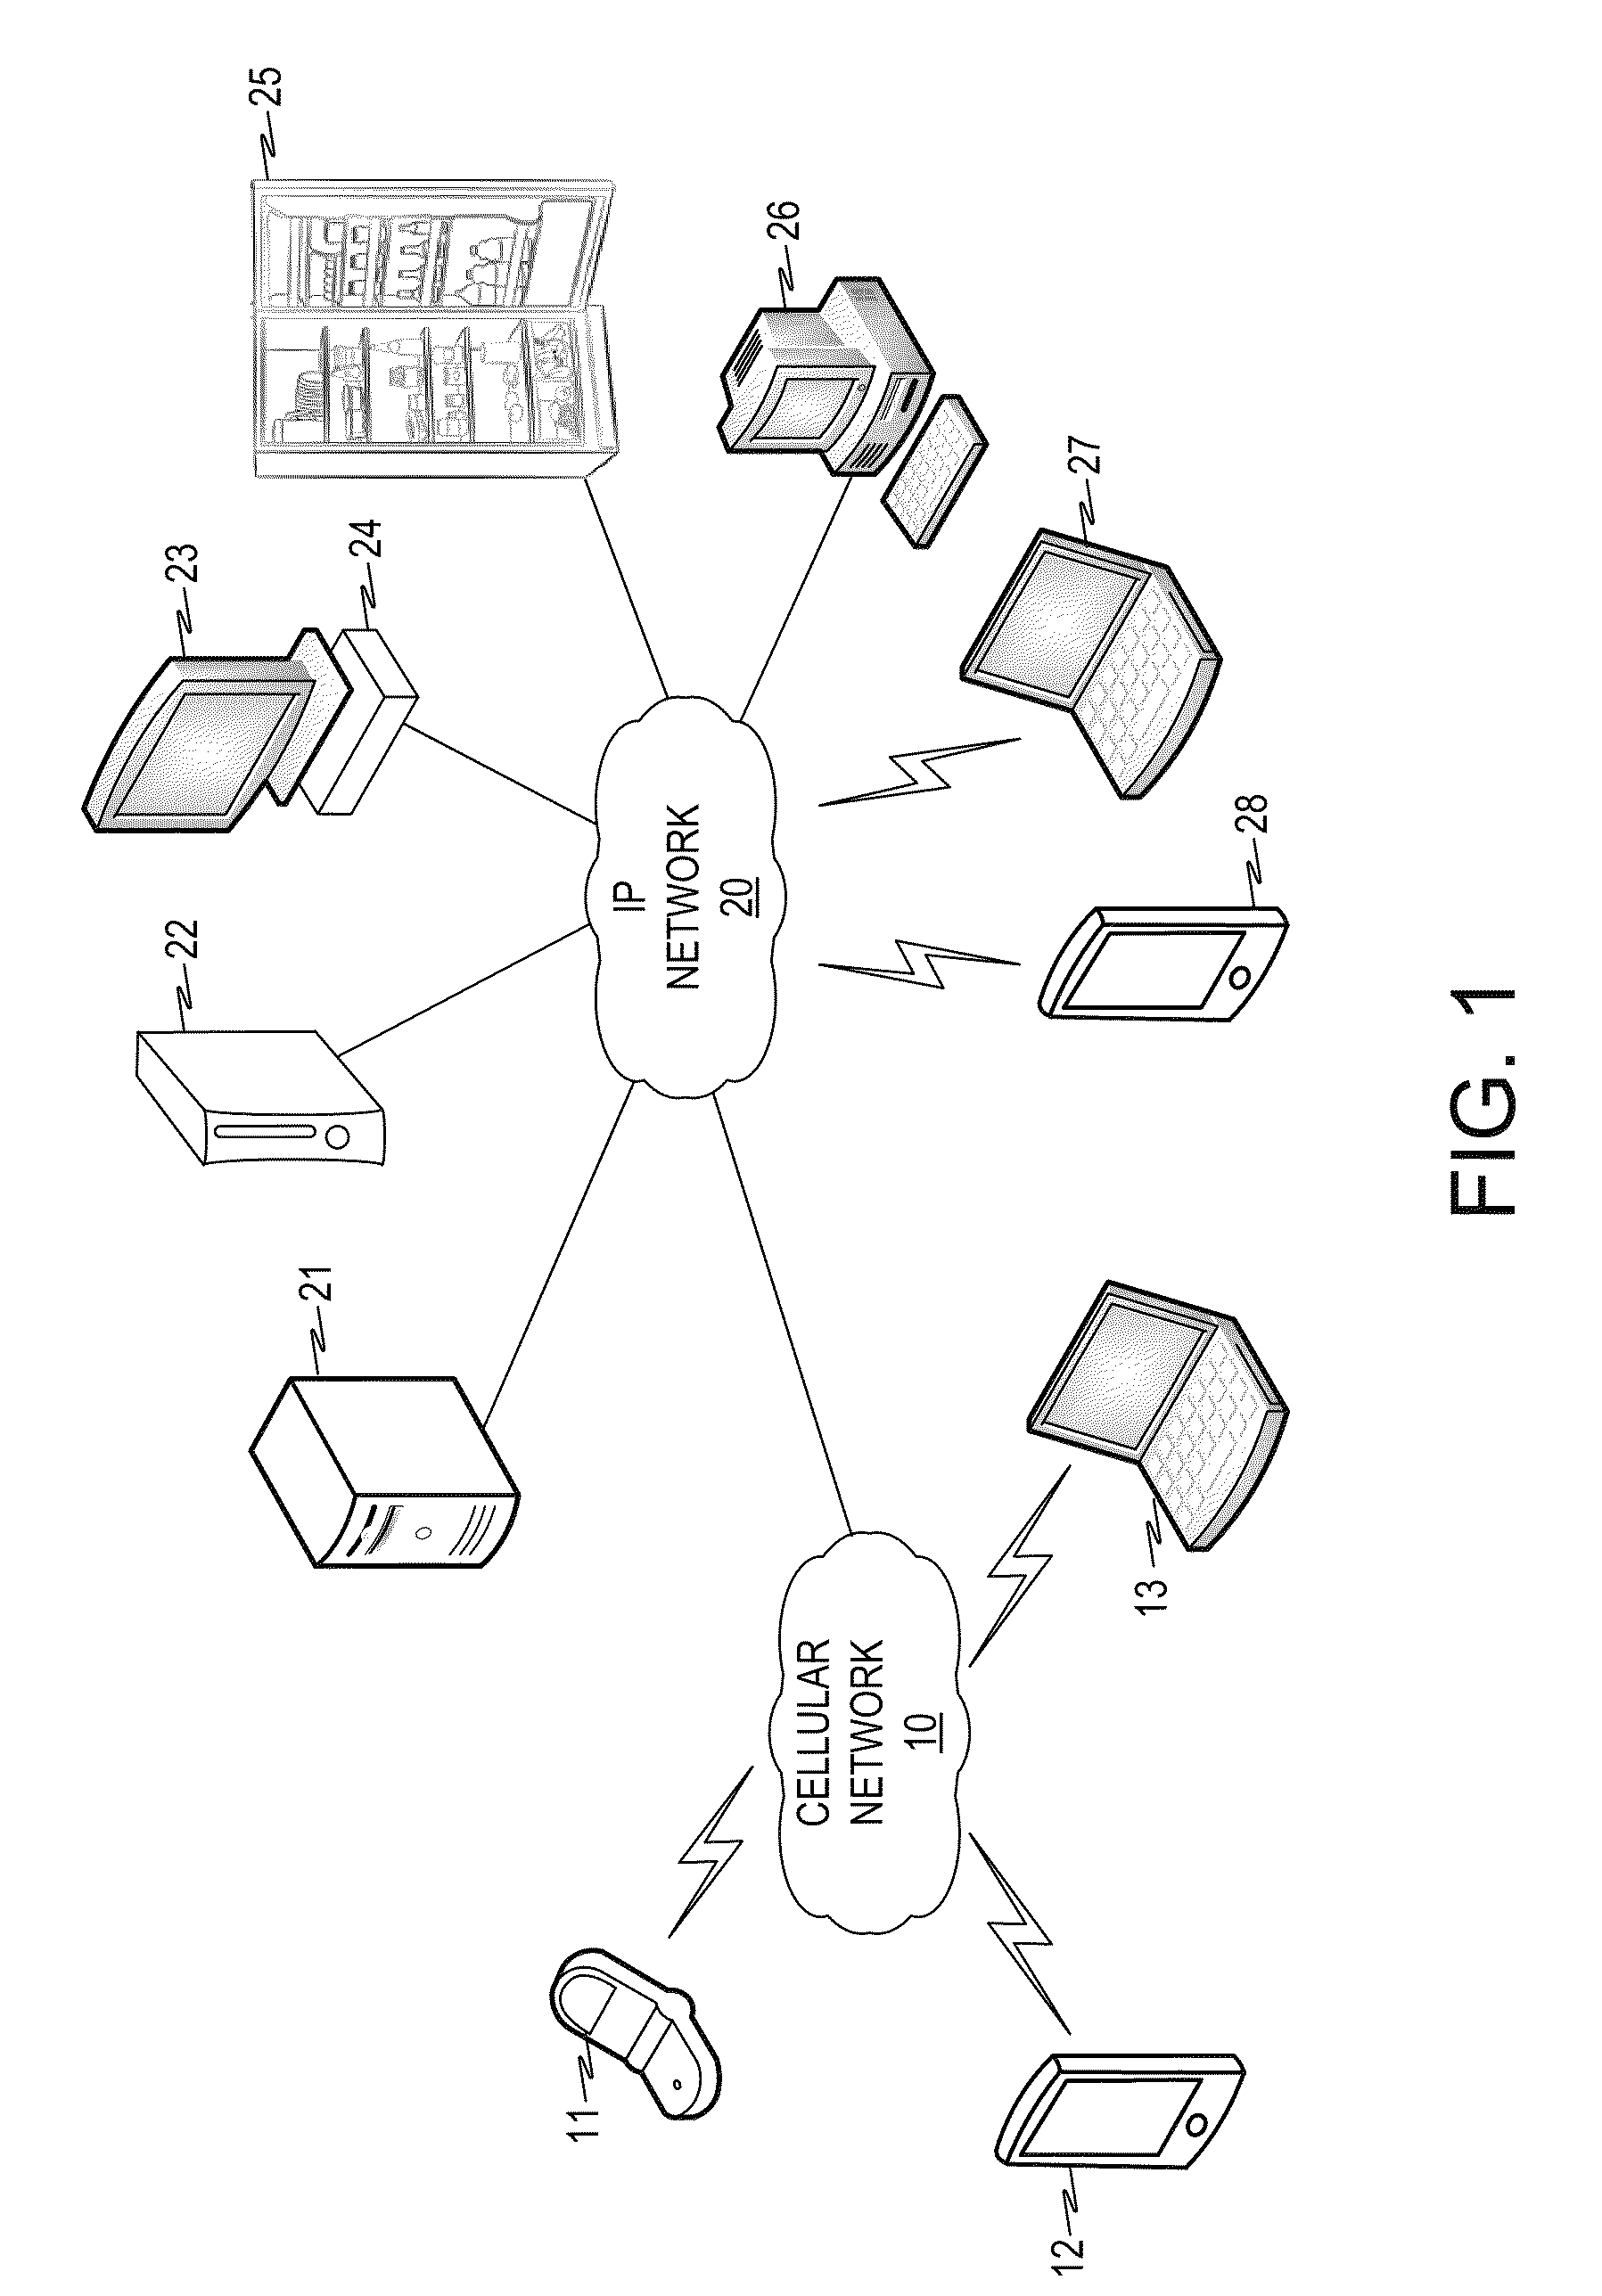 System, method and apparatus for providing functions to applications on a digital electronic device